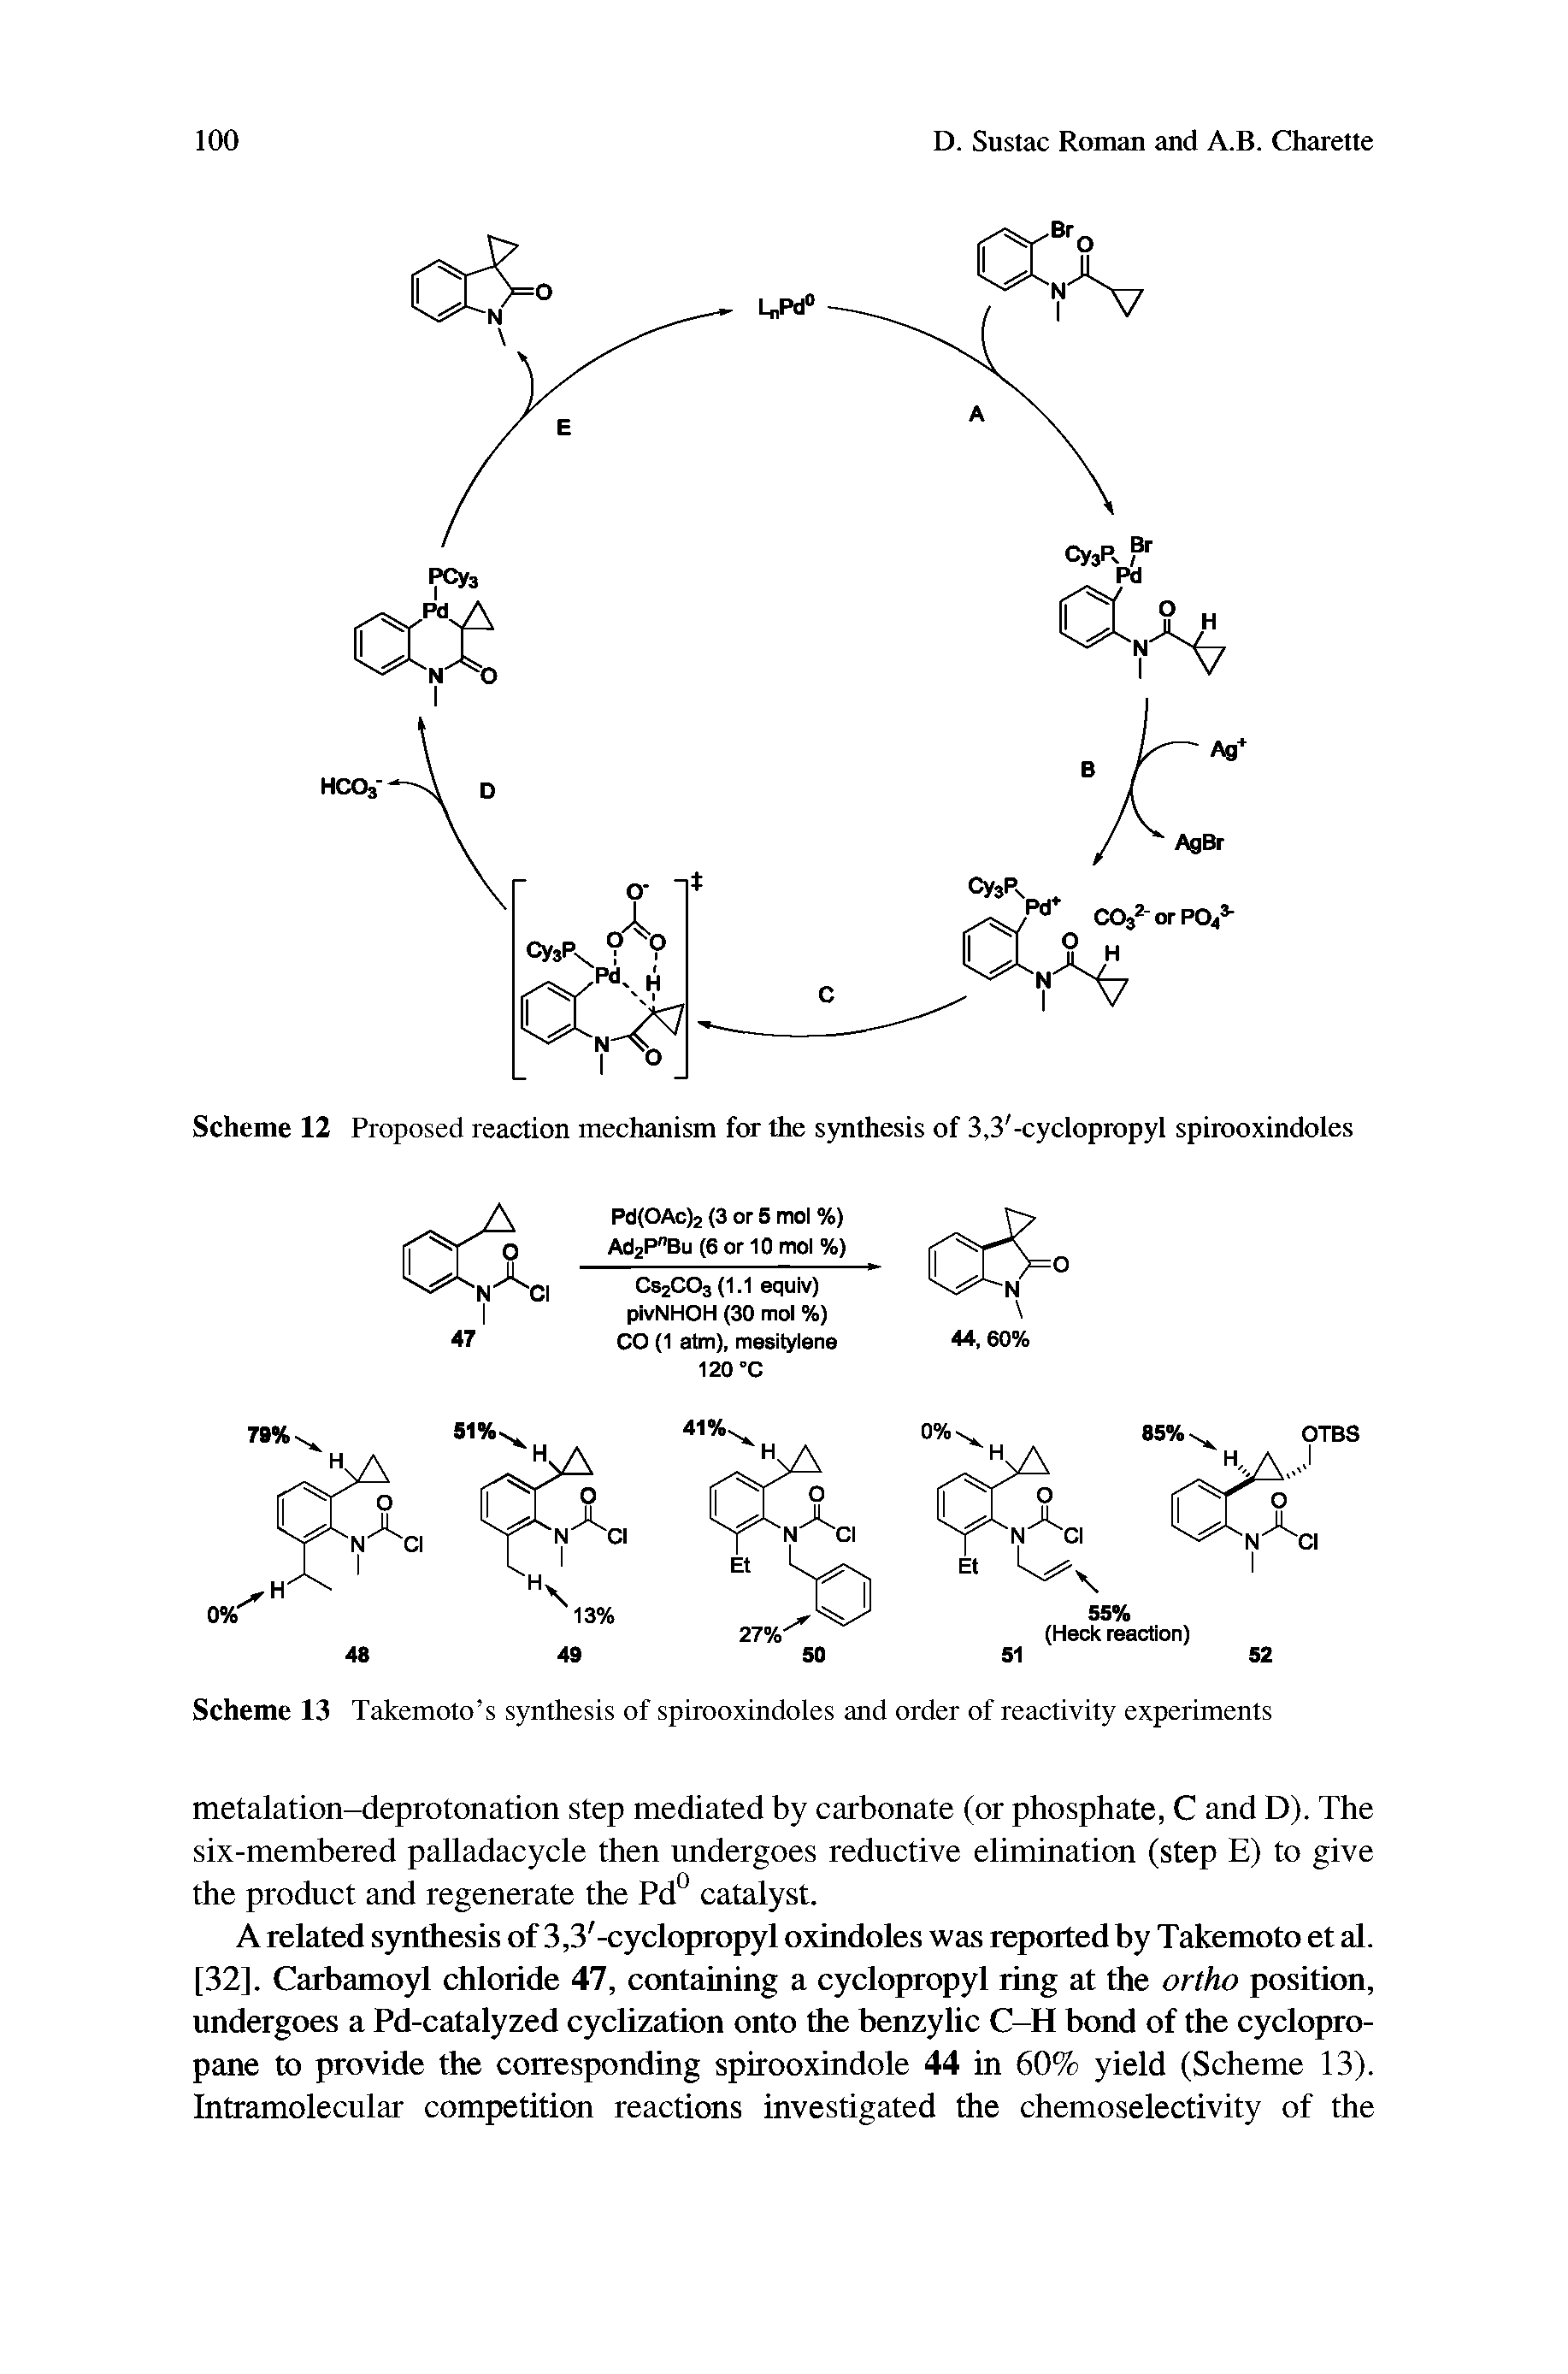 Scheme 12 Proposed reaction mechanism for the synthesis of 3,3 -cyclopropyl spirooxindoles...